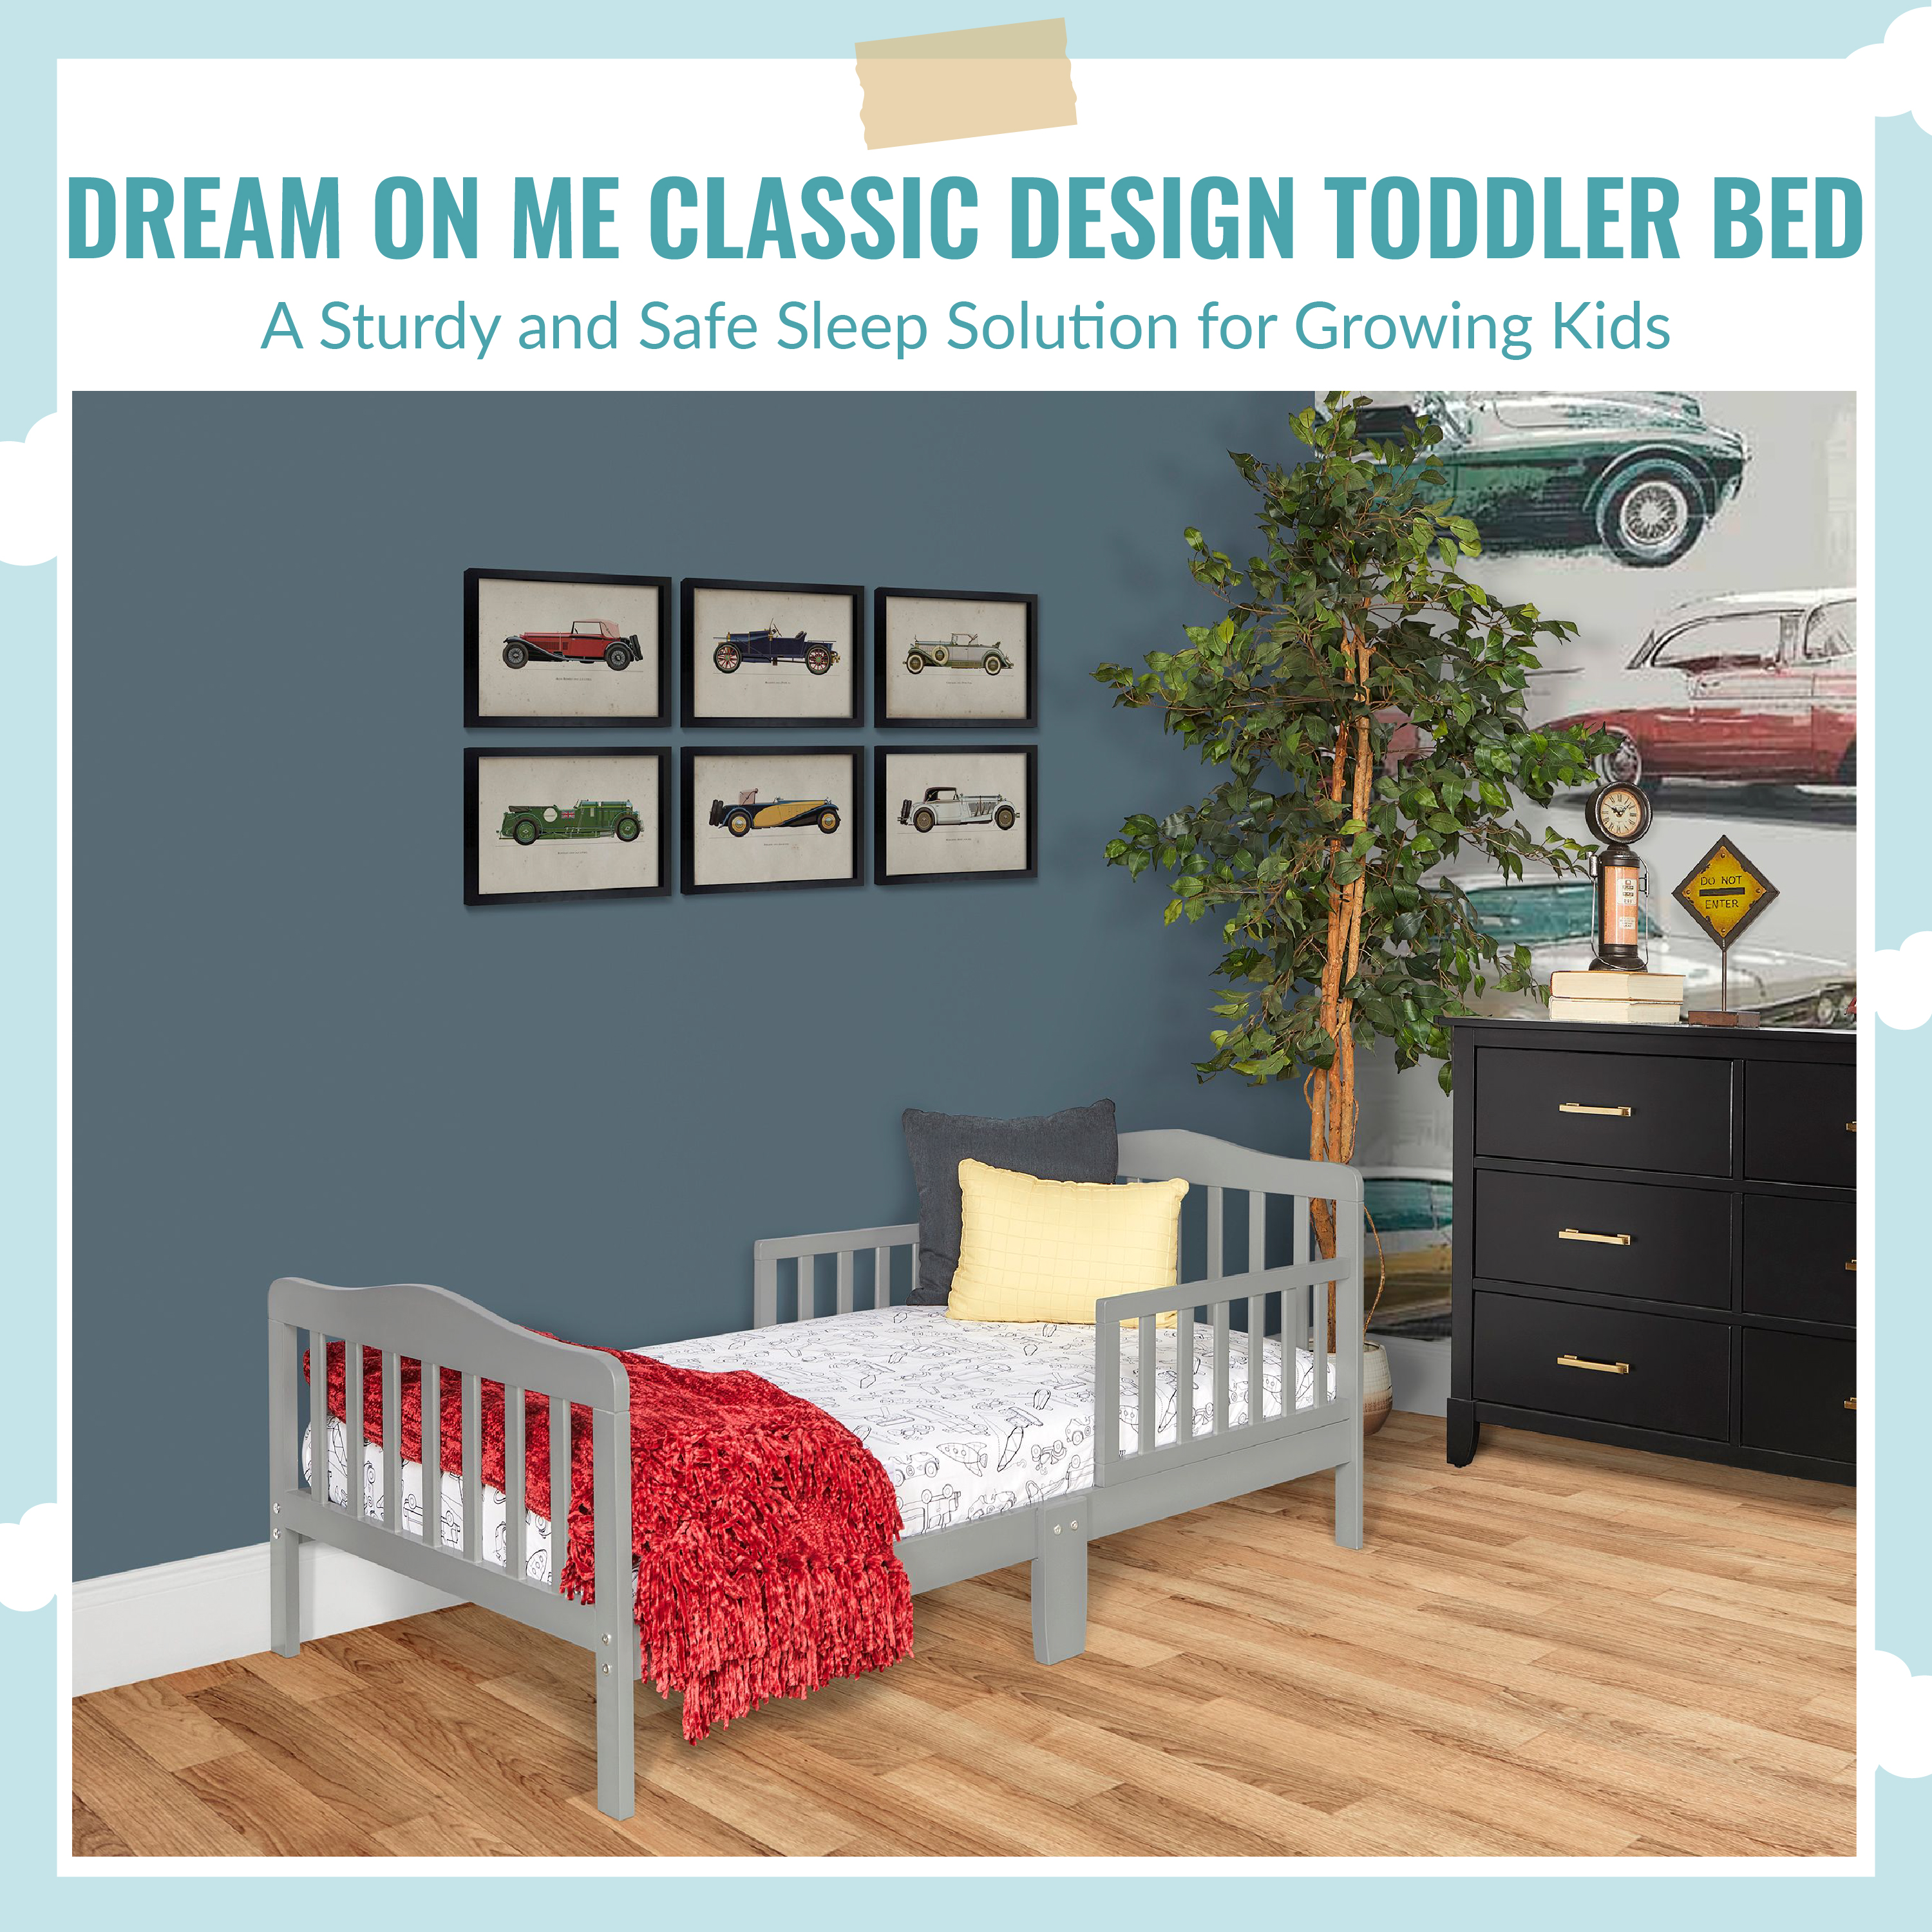 Dream On Me Contemporary Design Toddler Bed - image 2 of 20